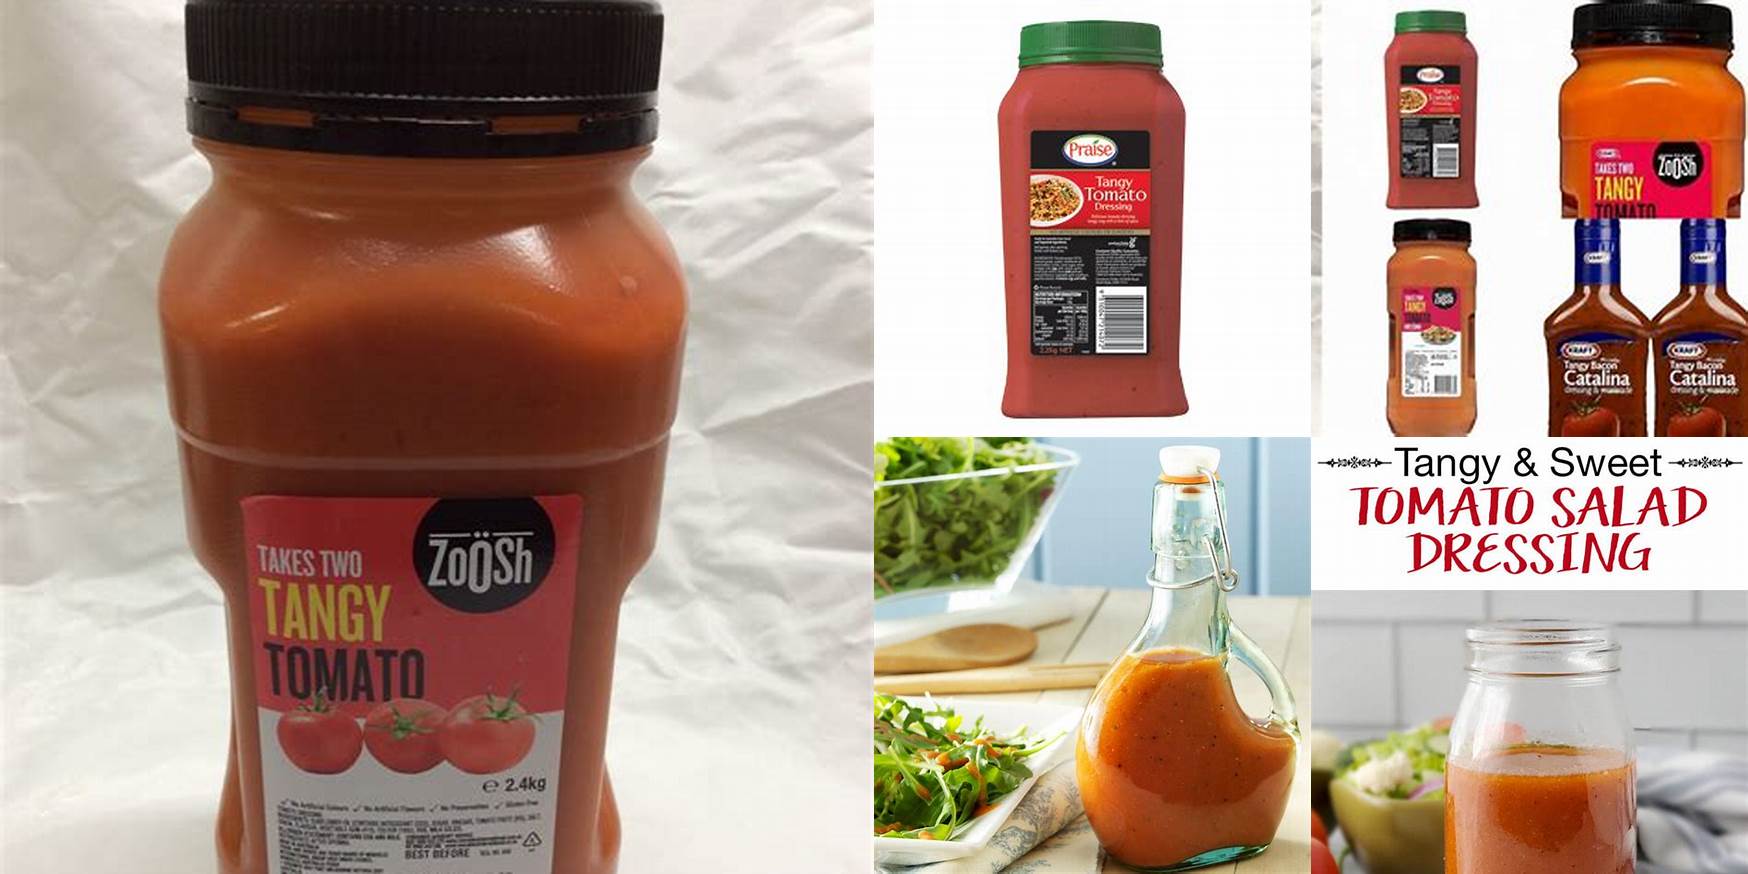 Where To Buy Tangy Tomato Dressing